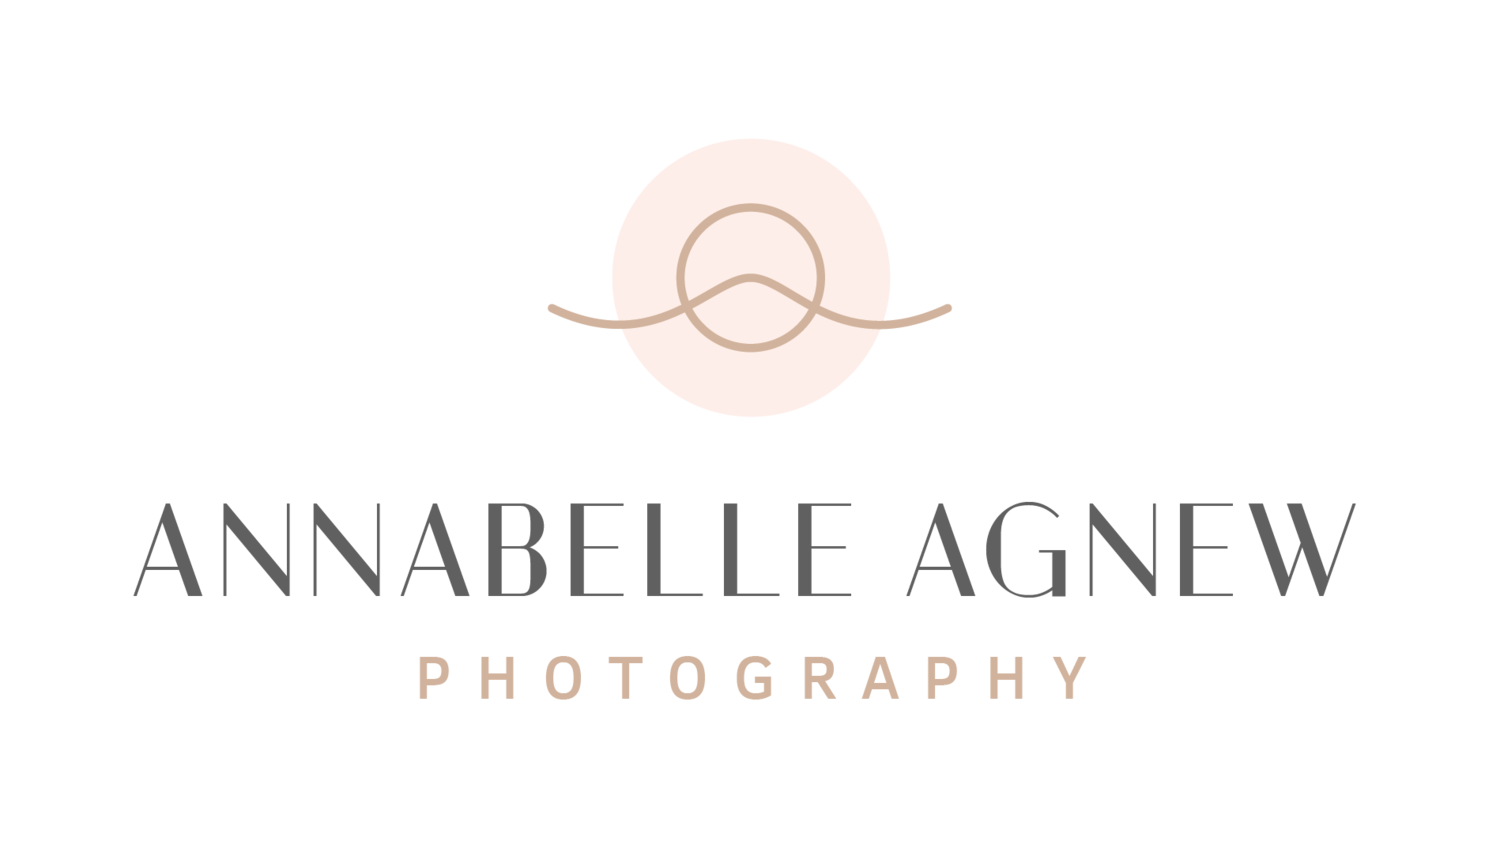 Annabelle Agnew Photography